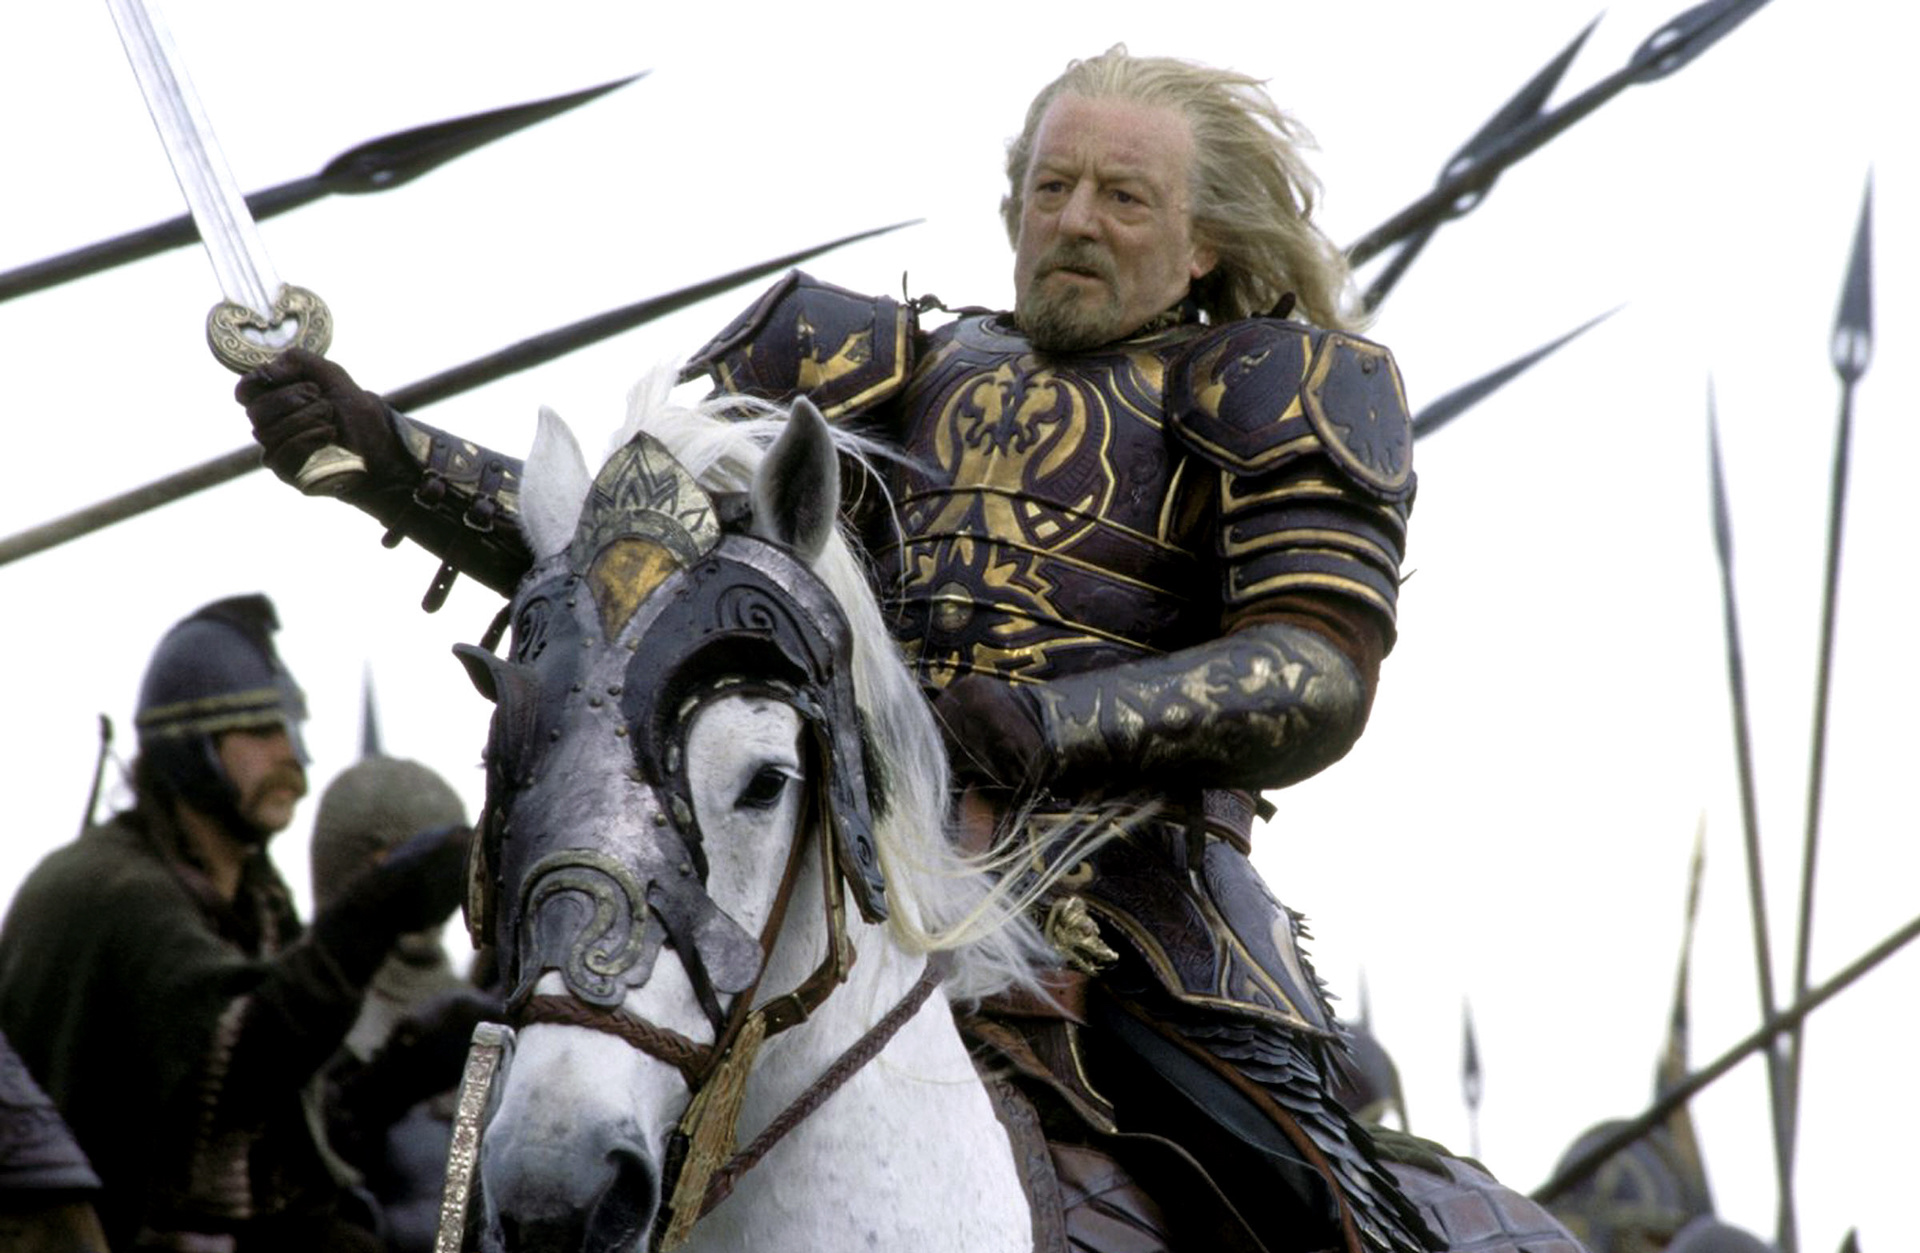 THE LORD OF THE RINGS: THE RETURN OF THE KING, Bernard Hill, 2003, (c) New Line/courtesy Everett Collection